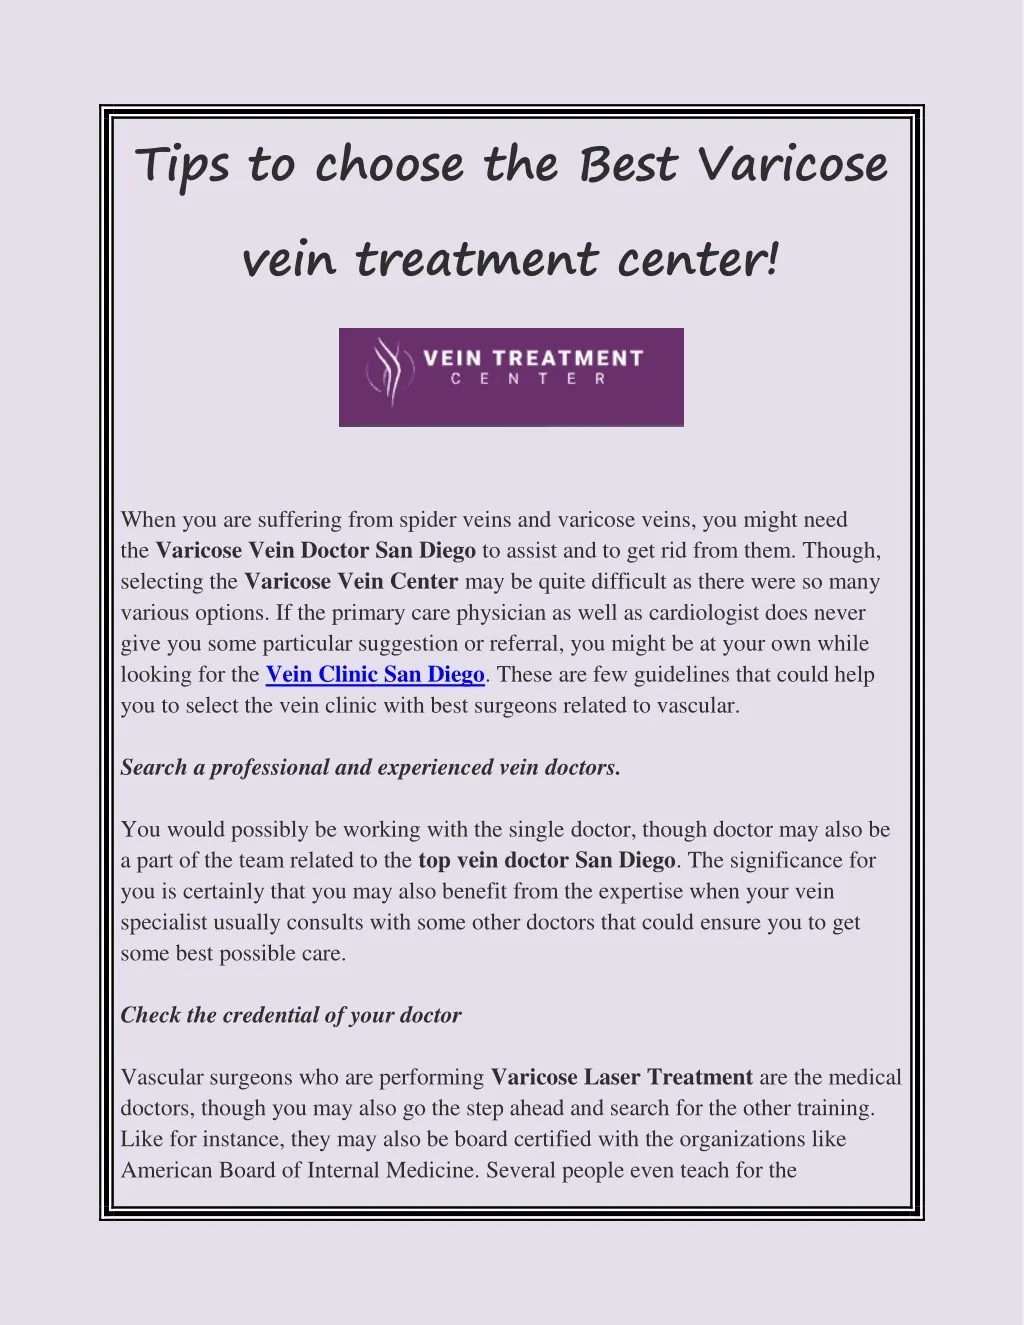 tips to choose the best varicose vein treatment